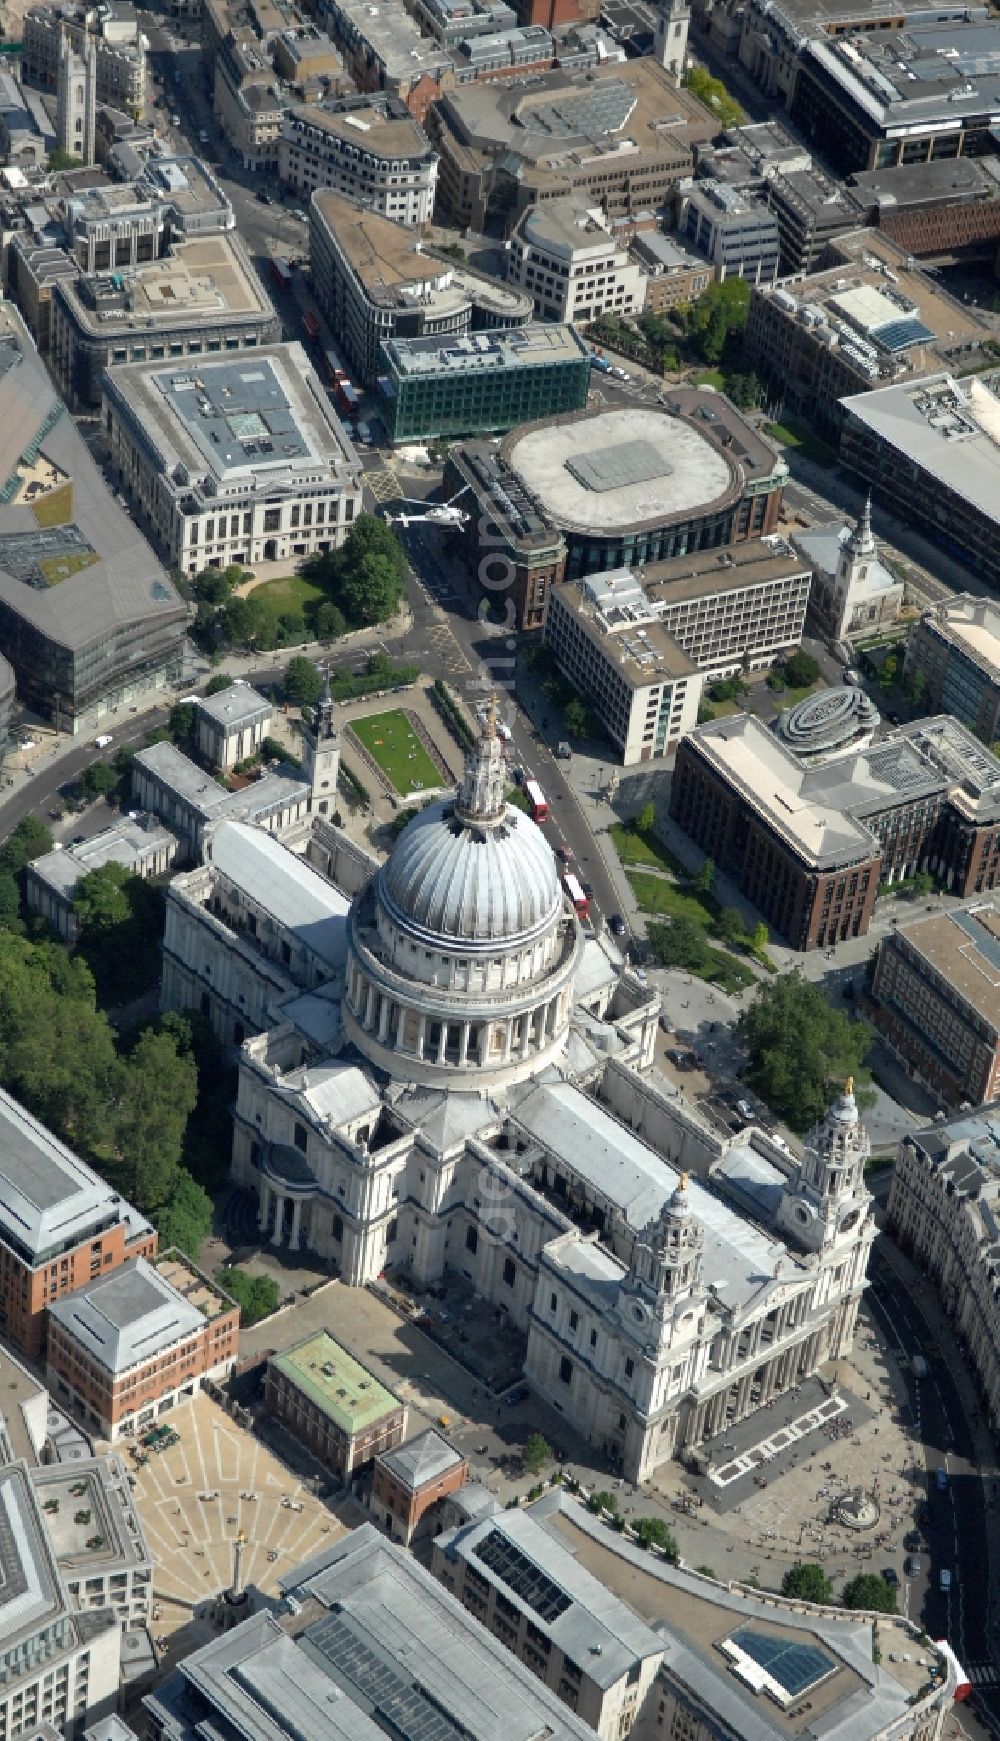 London from above - View of the St Paul's Cathedral in the city borough of City of London. The world-famous church building is the headquarters of the London diocese of the Anglican Church. The St. Paul's Cathedral is one of the largest cathedrals in the world, it is also regarded as the most famous church in the British capital